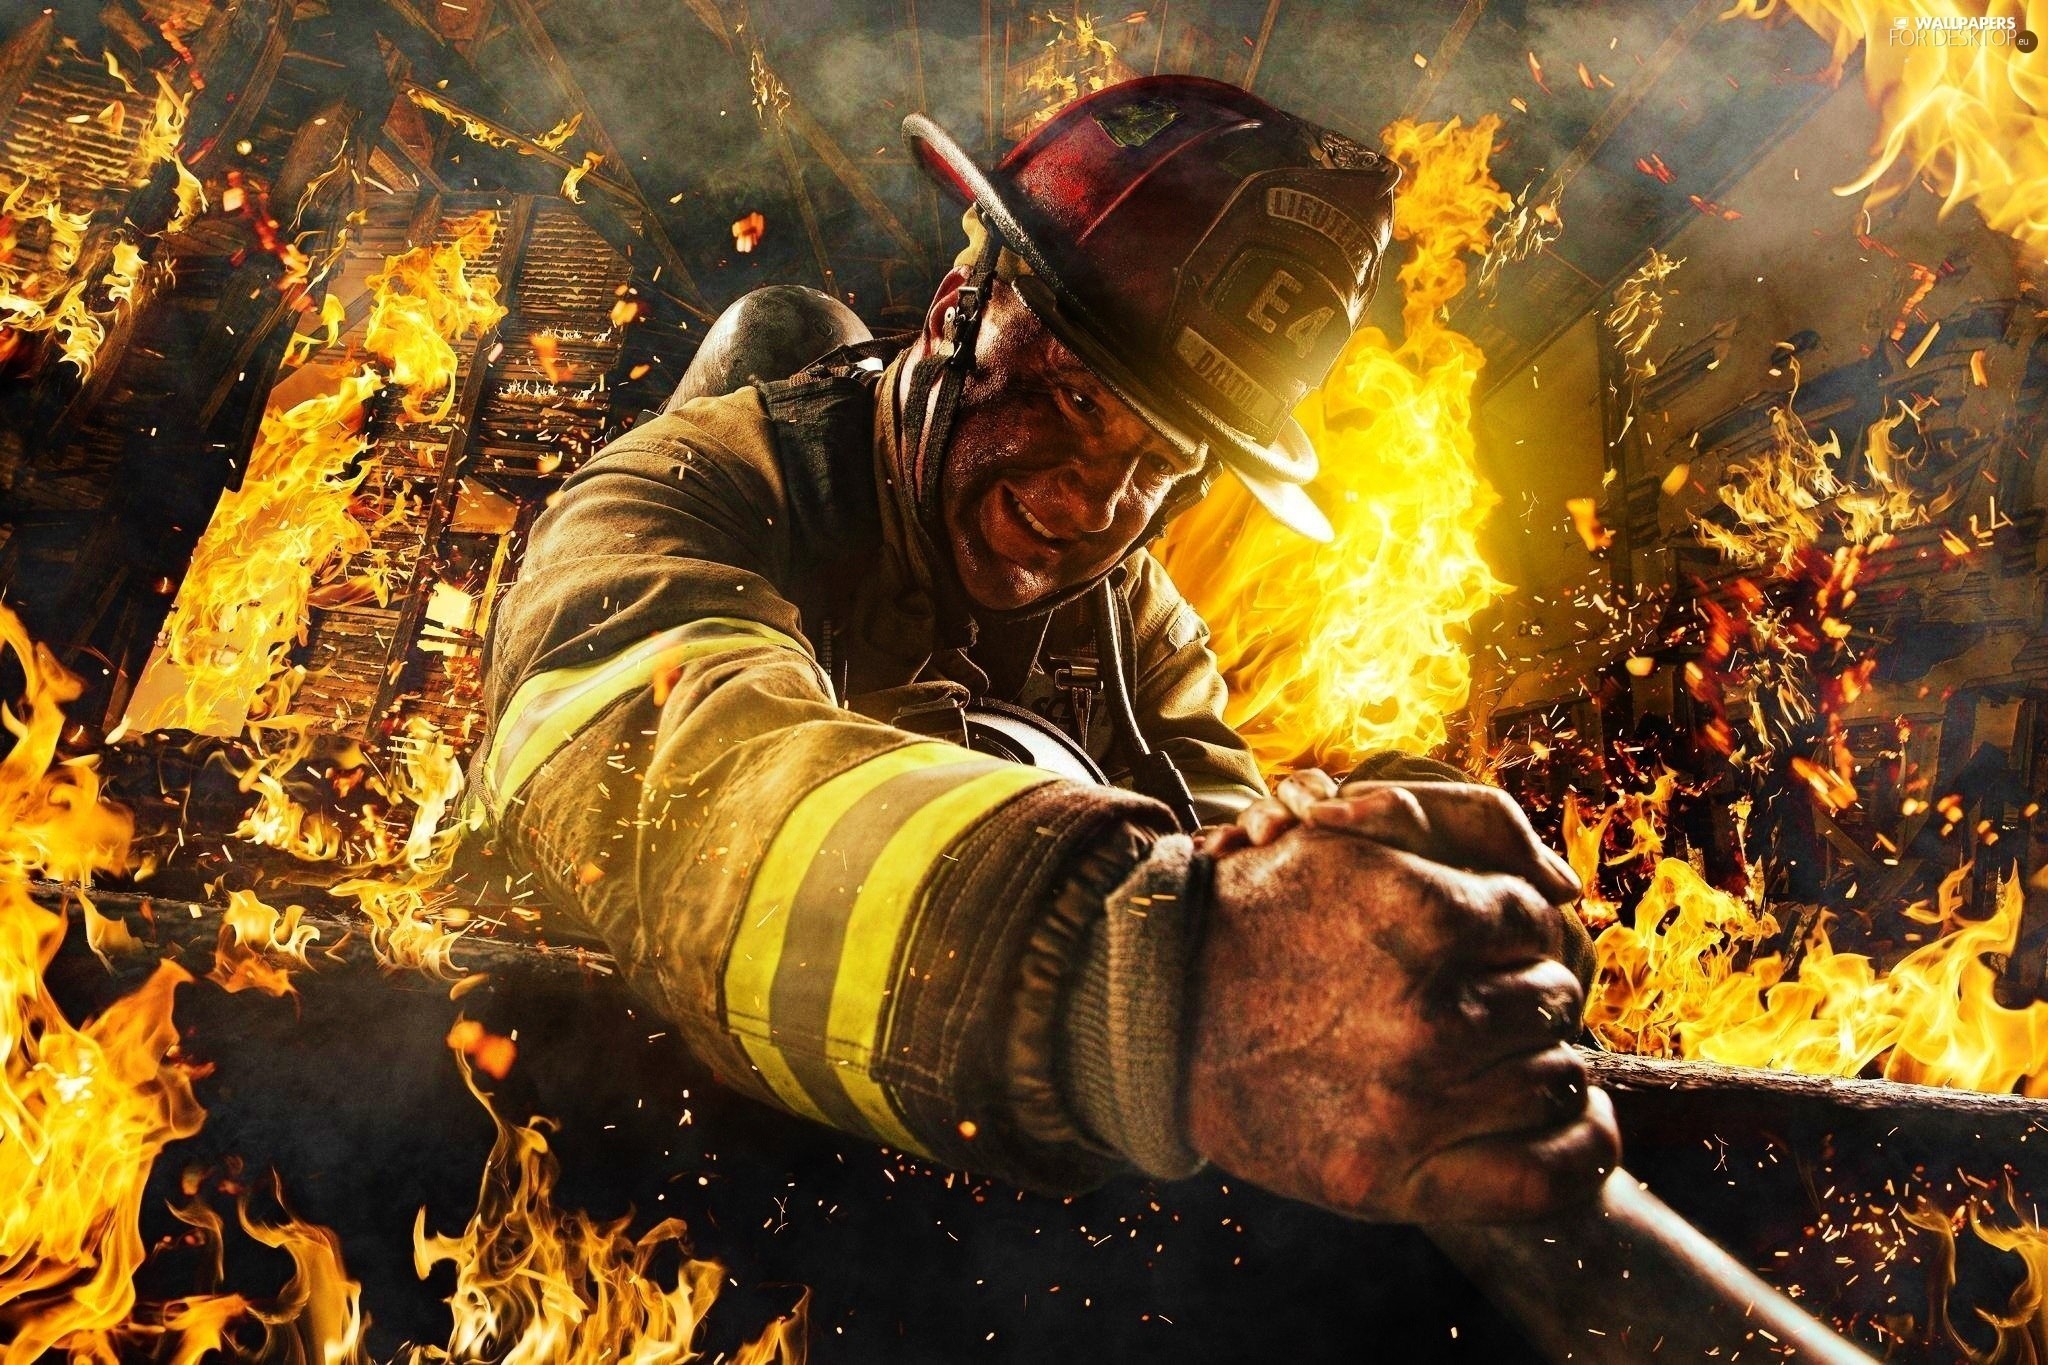 2048x1365 Fire Department Backgrounds. Download Â· 3554x1999 UHD .